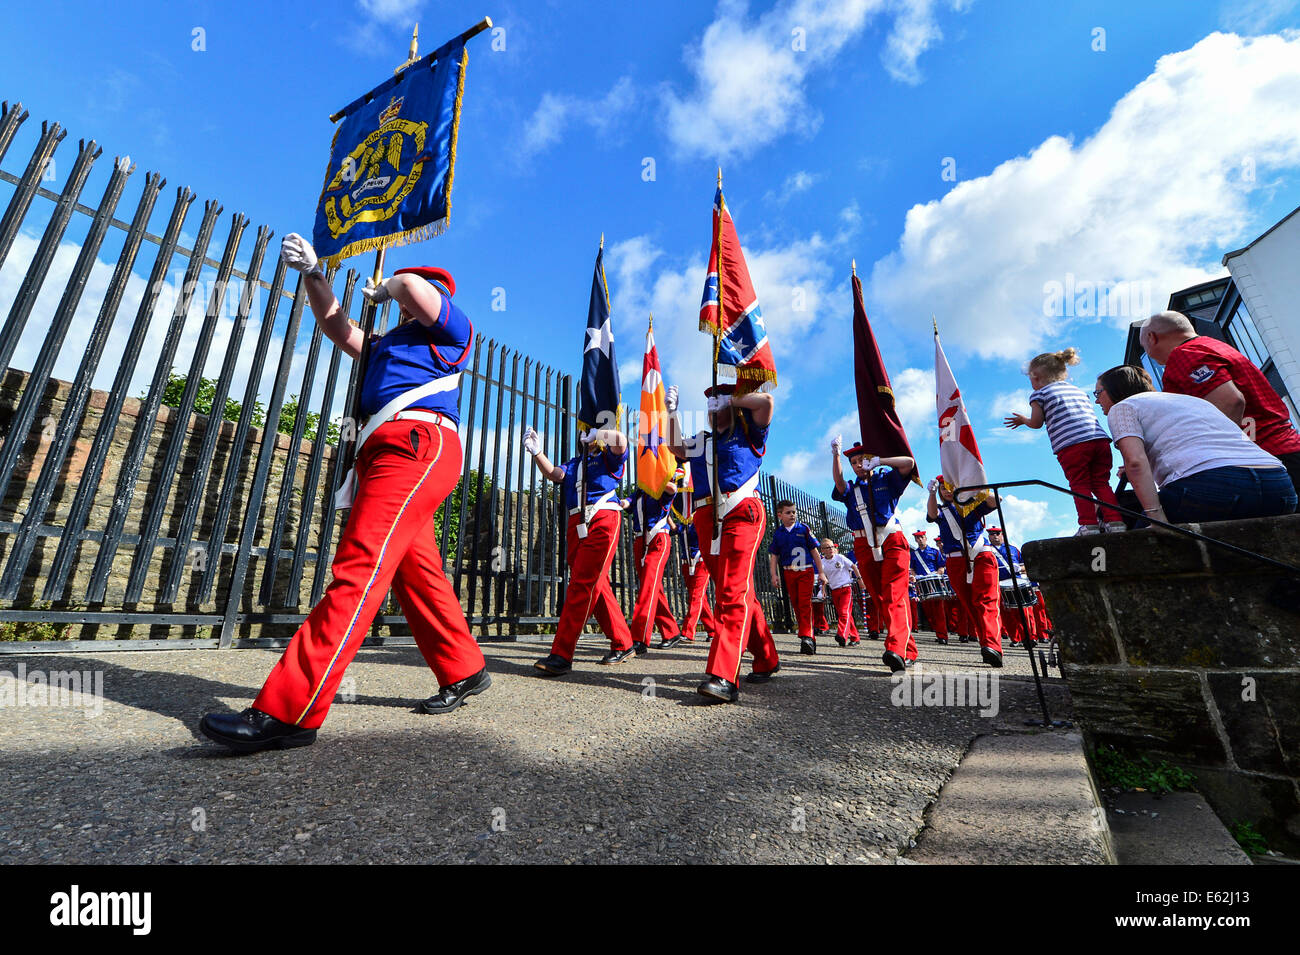 The loyalist Burntollet Flute band march on the Derry Walls during the annual Apprentice Boys of Derry parade. Stock Photo